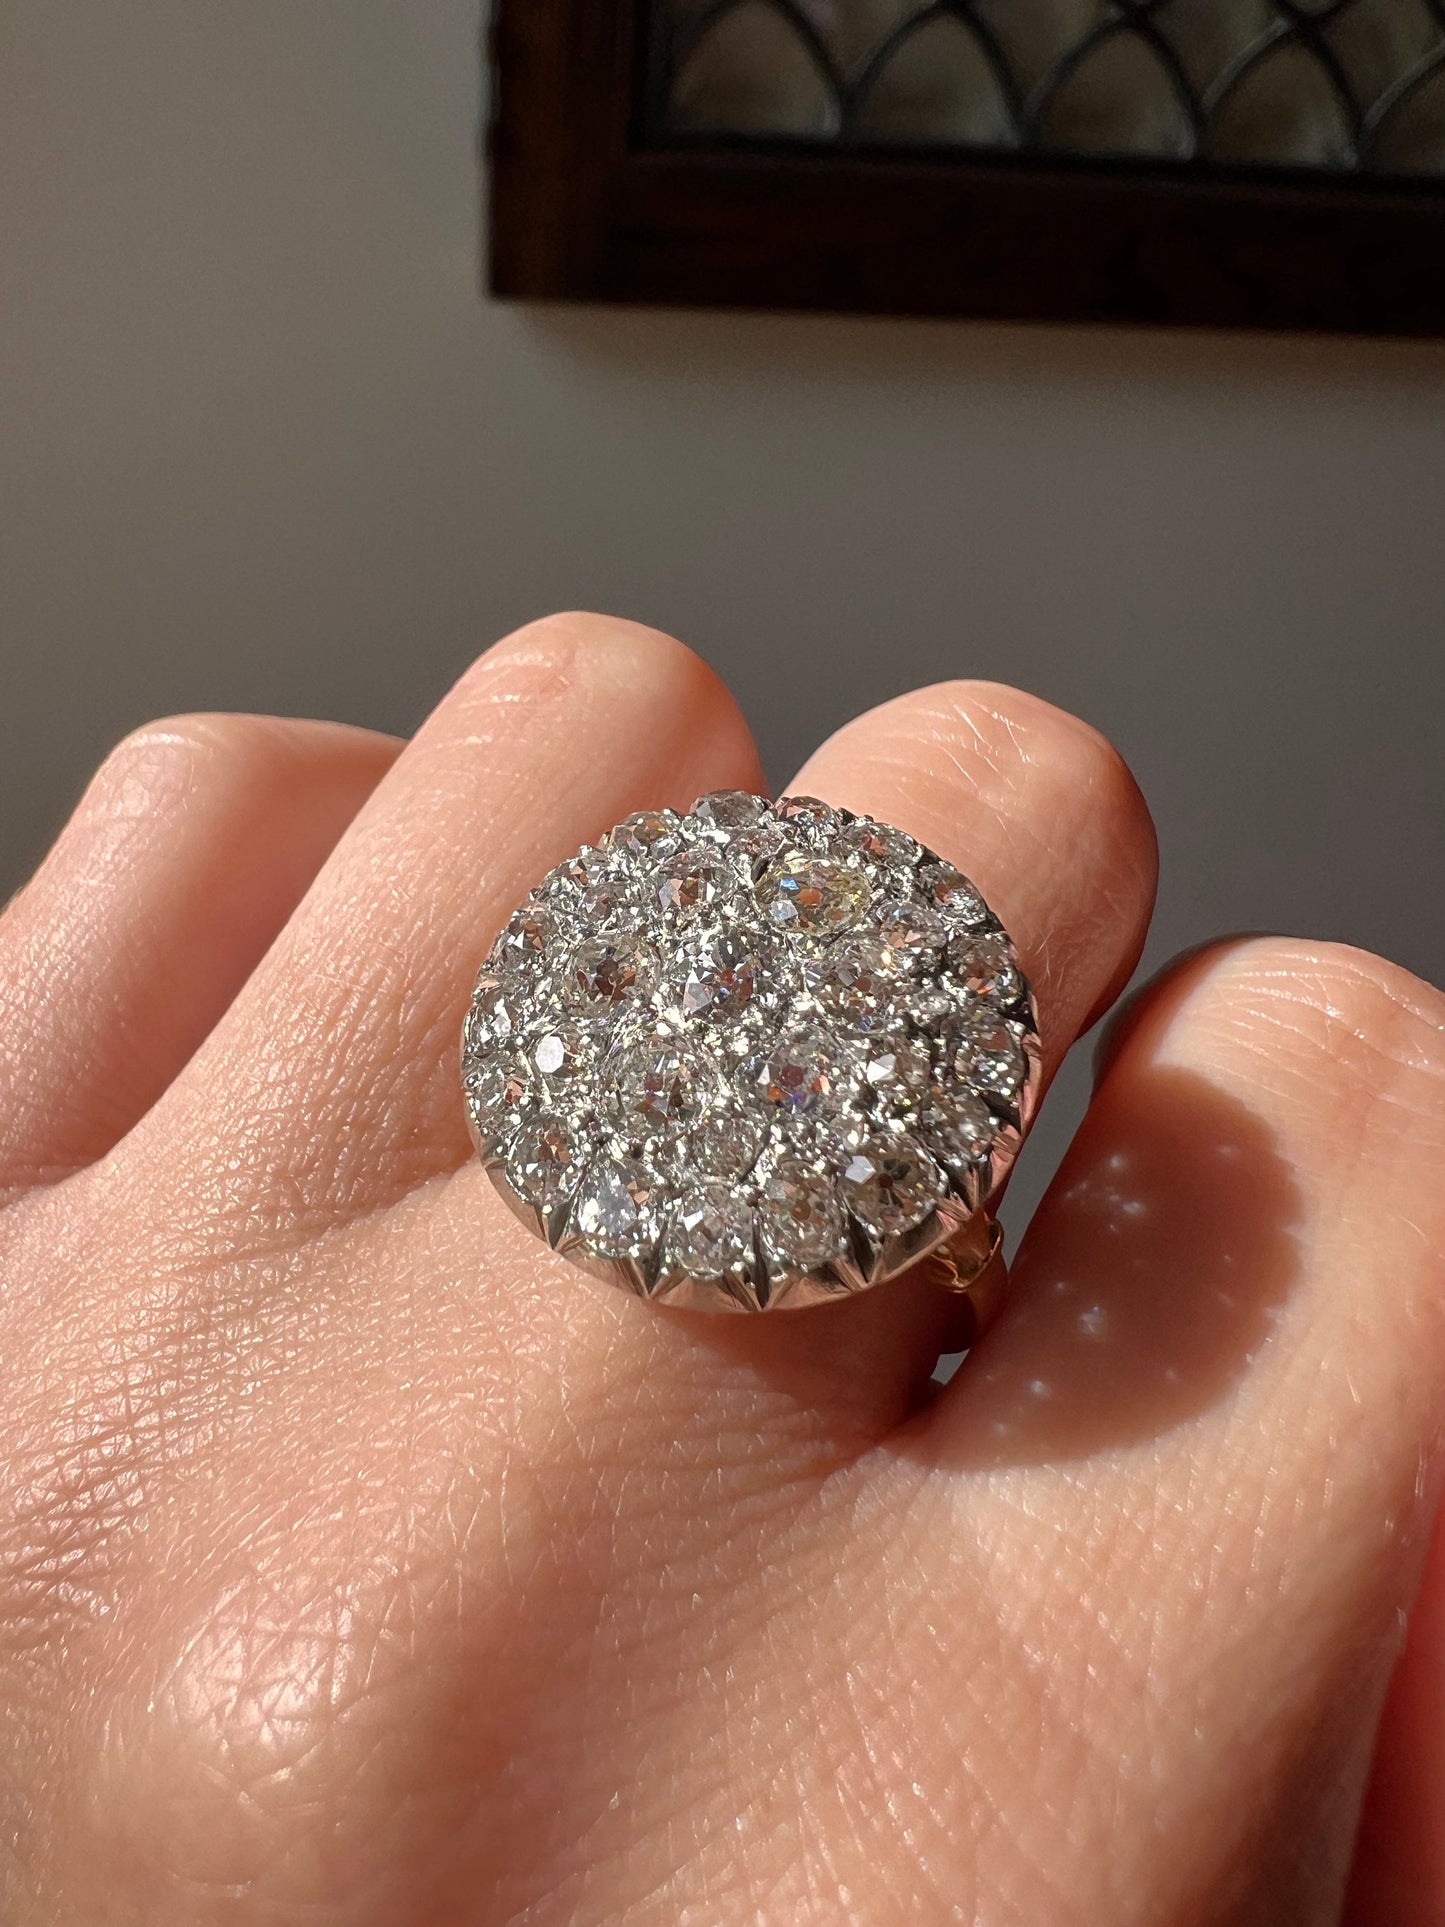 XL DOMED French Antique 2.85 Carat Old Mine Cut DIAMOND Cobblestone Cluster Ring 18k Gold Platinum Belle Epoque Romantic Gift Chunky OmC